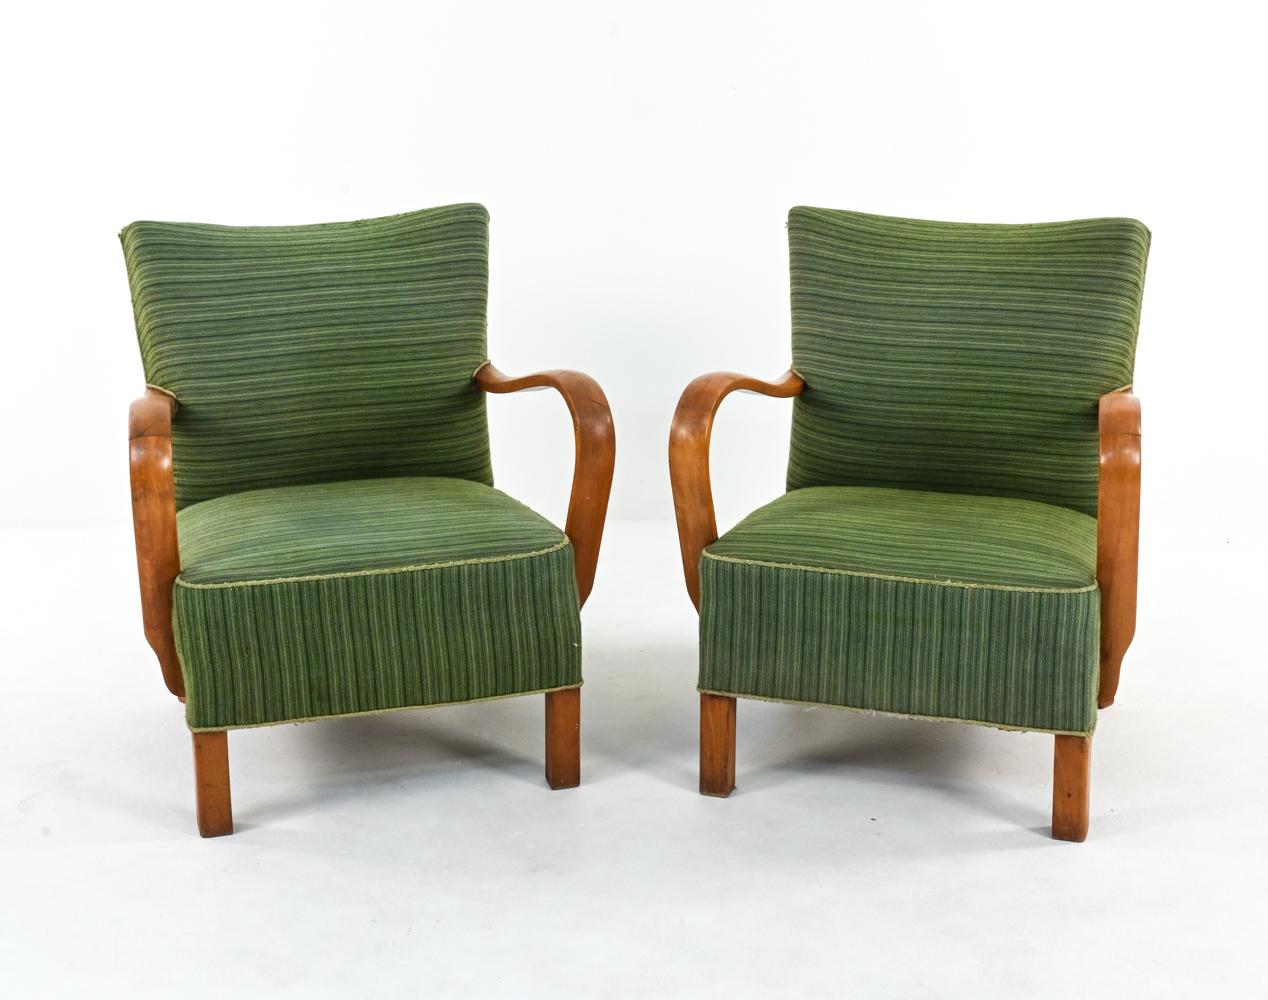 This classic pair of Danish Mid-Century lounge chairs features chunky legs and gracefully curved arms of sculpted elm wood. The striped wool upholstery is playfully offset to create an interesting mix of vertical and horizontal lines. The seat rails